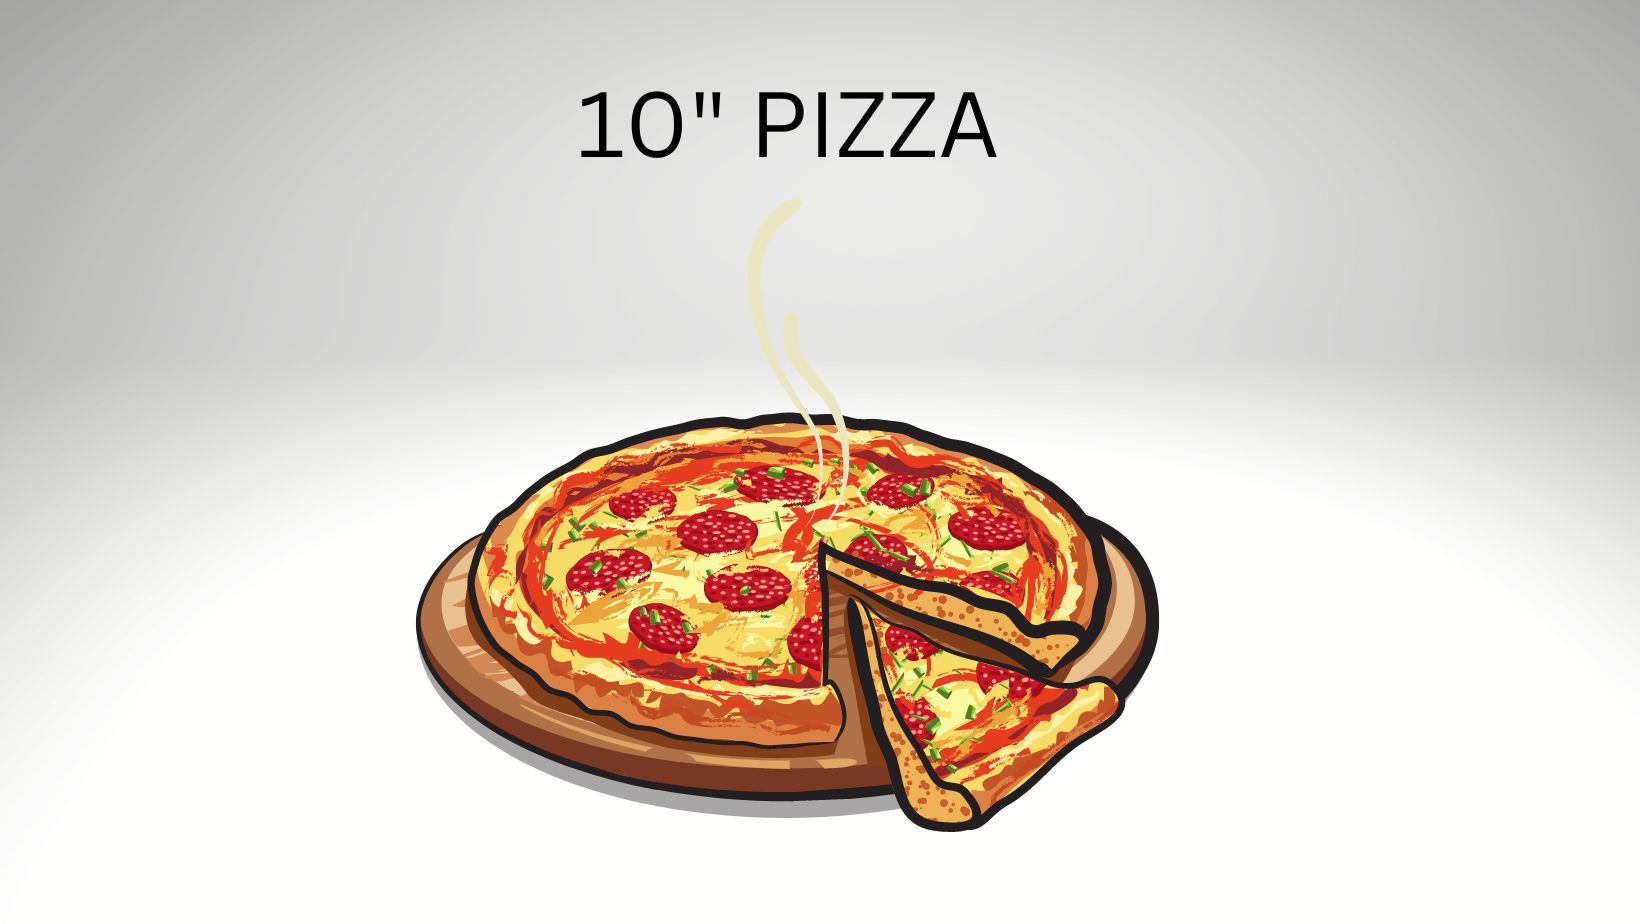 How Big Is A 10 Inch Pizza? How Many Slices in 10 Inch Pizza?